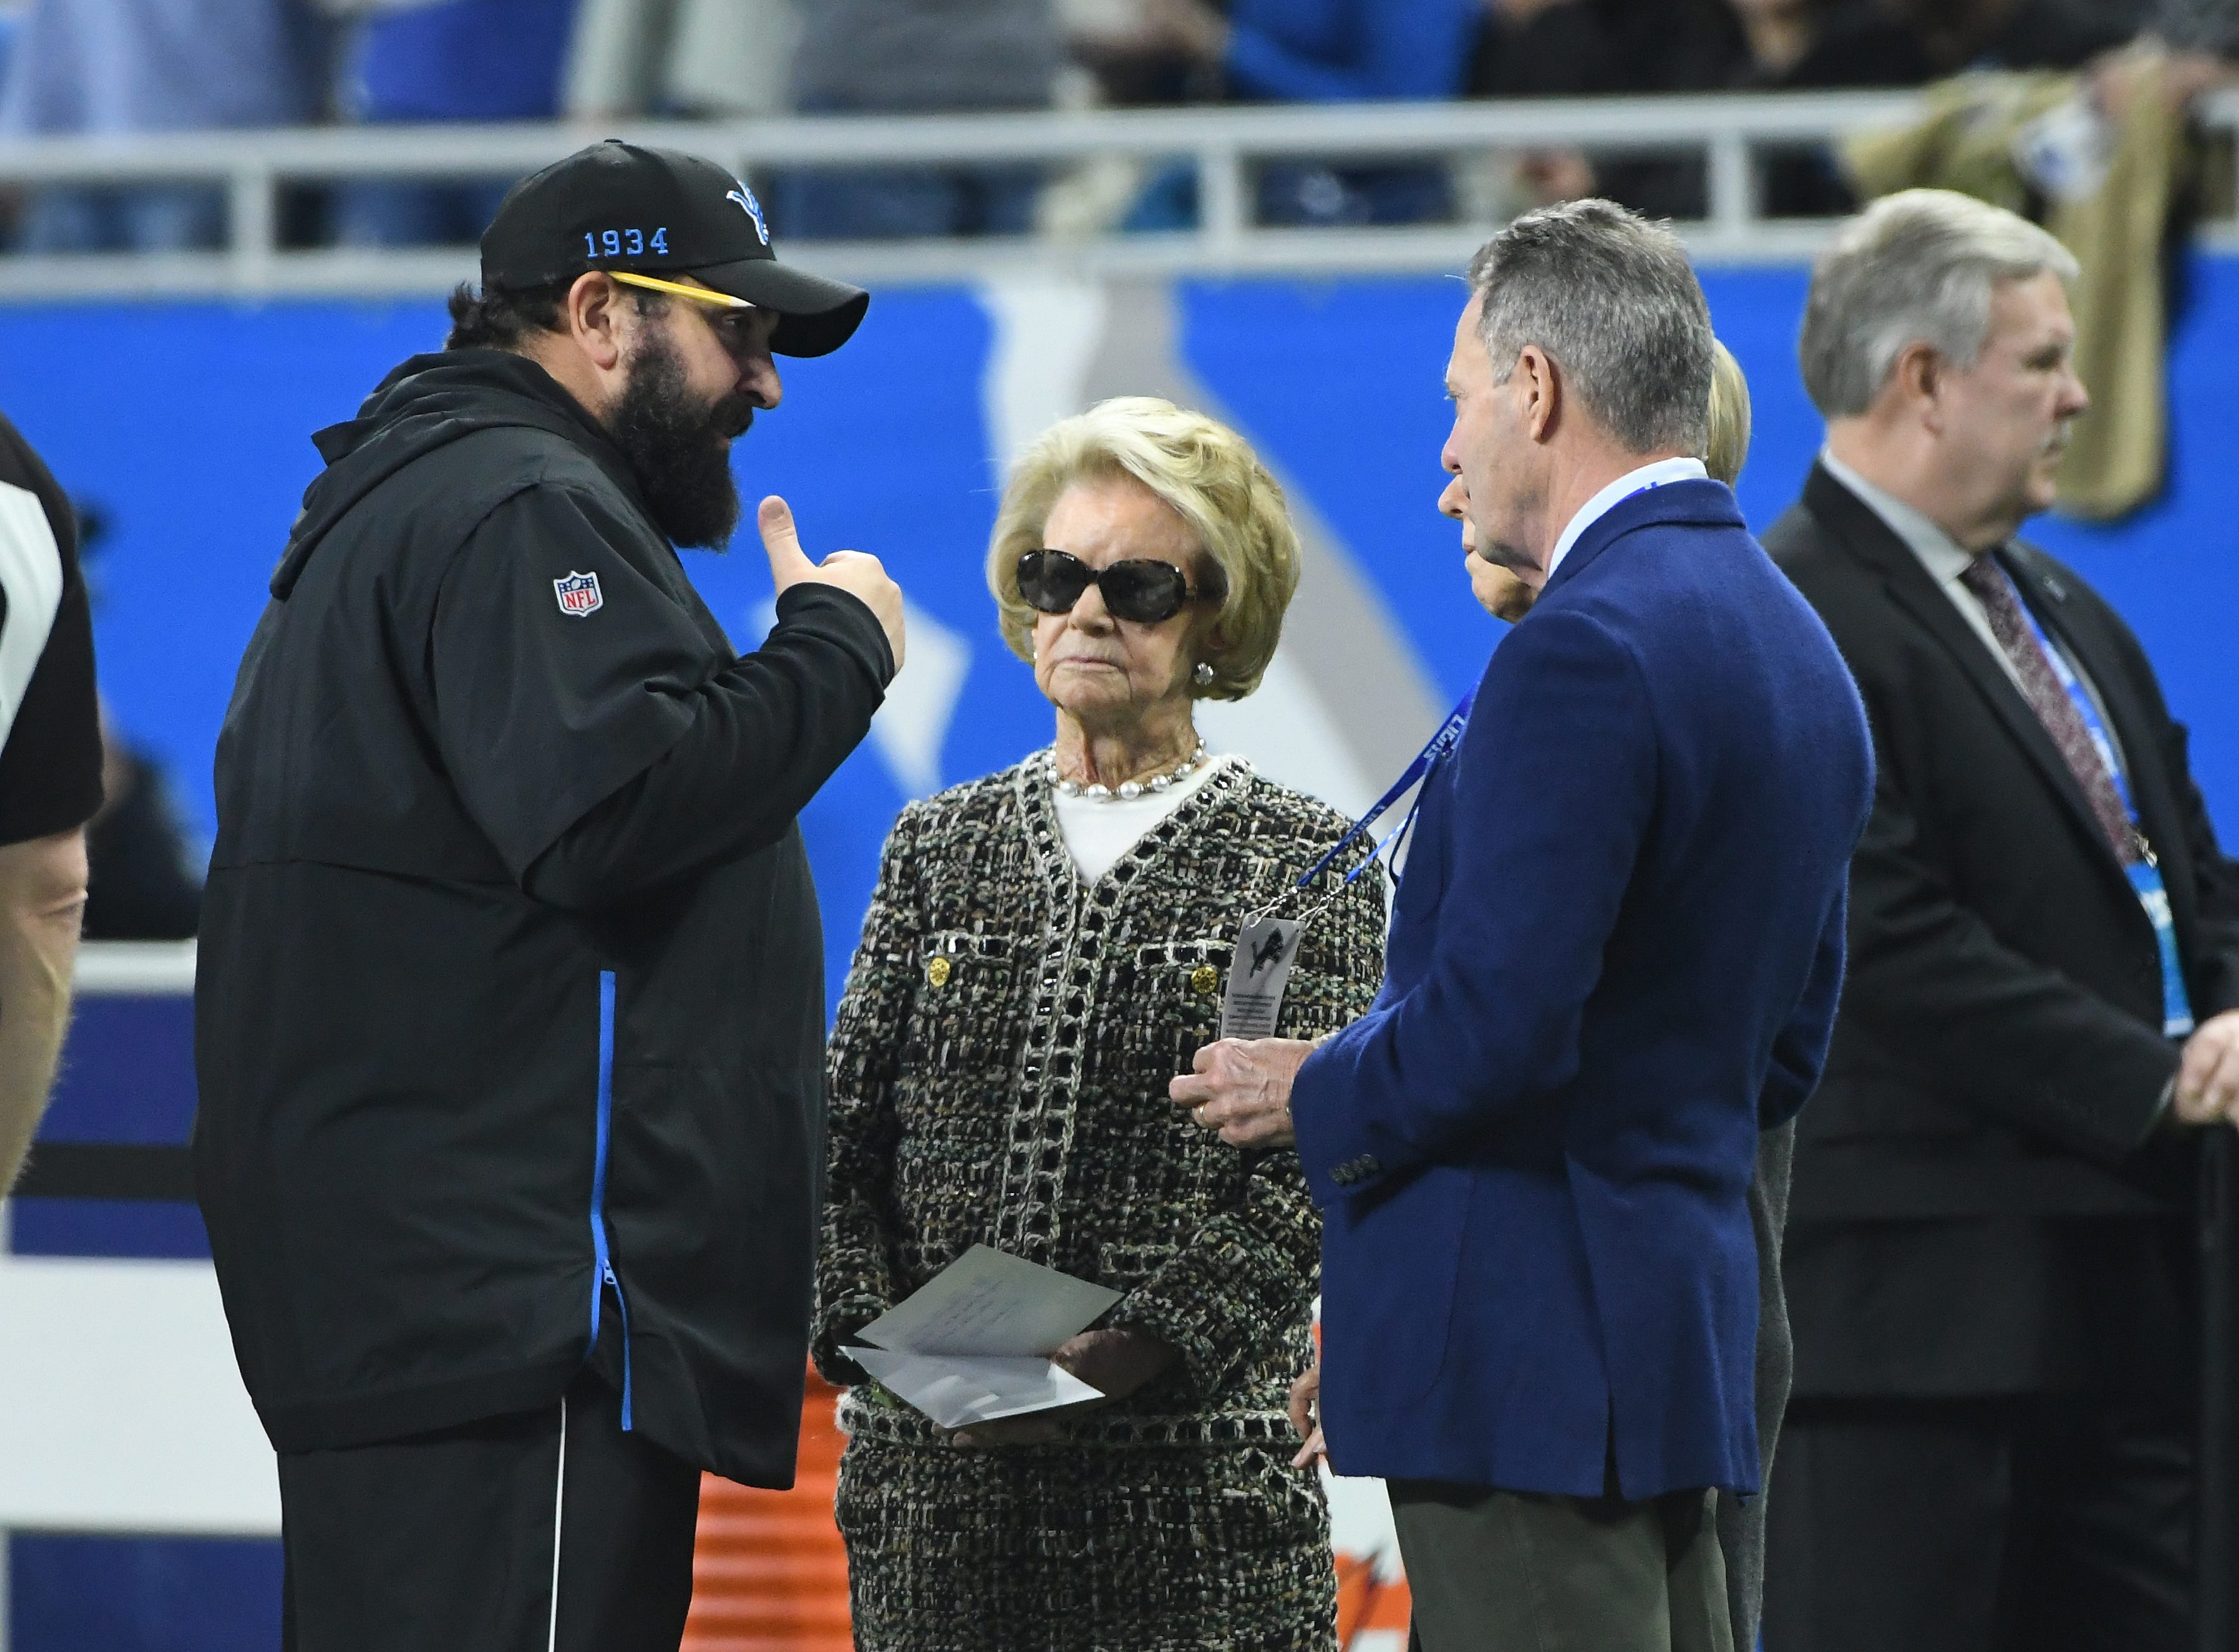 Lions head coach Matt Patricia talks with owner Martha Ford before the game against the Tampa Bay Buccaneers. NFL Detroit Lions vs. Tamp Bay Buccaneers at Ford Field in Detroit, Michigan on December 15, 2019.